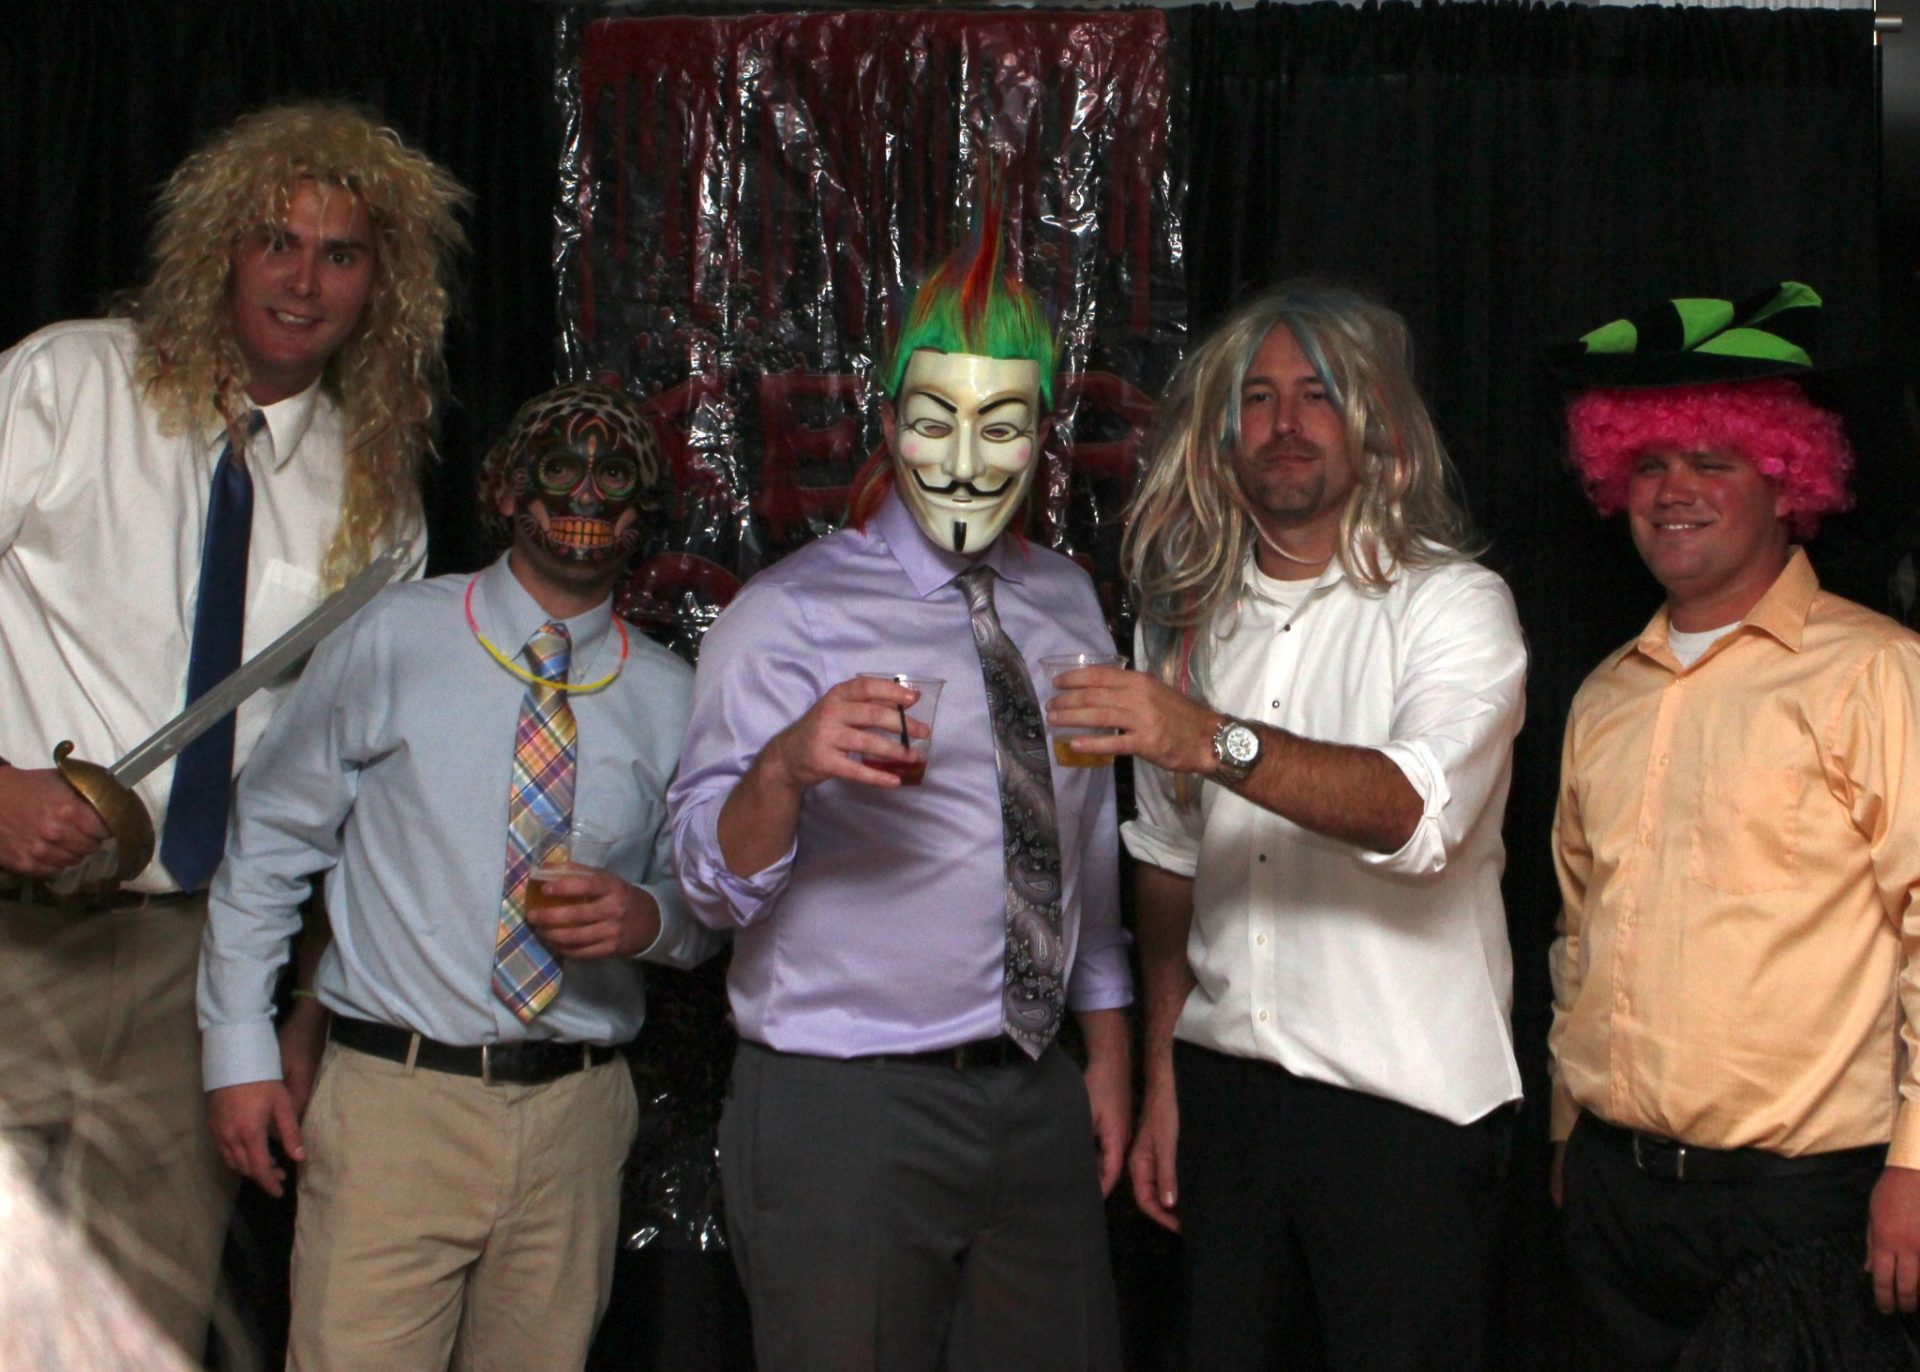 Guest photo booths are fun, especially at halloween weddings